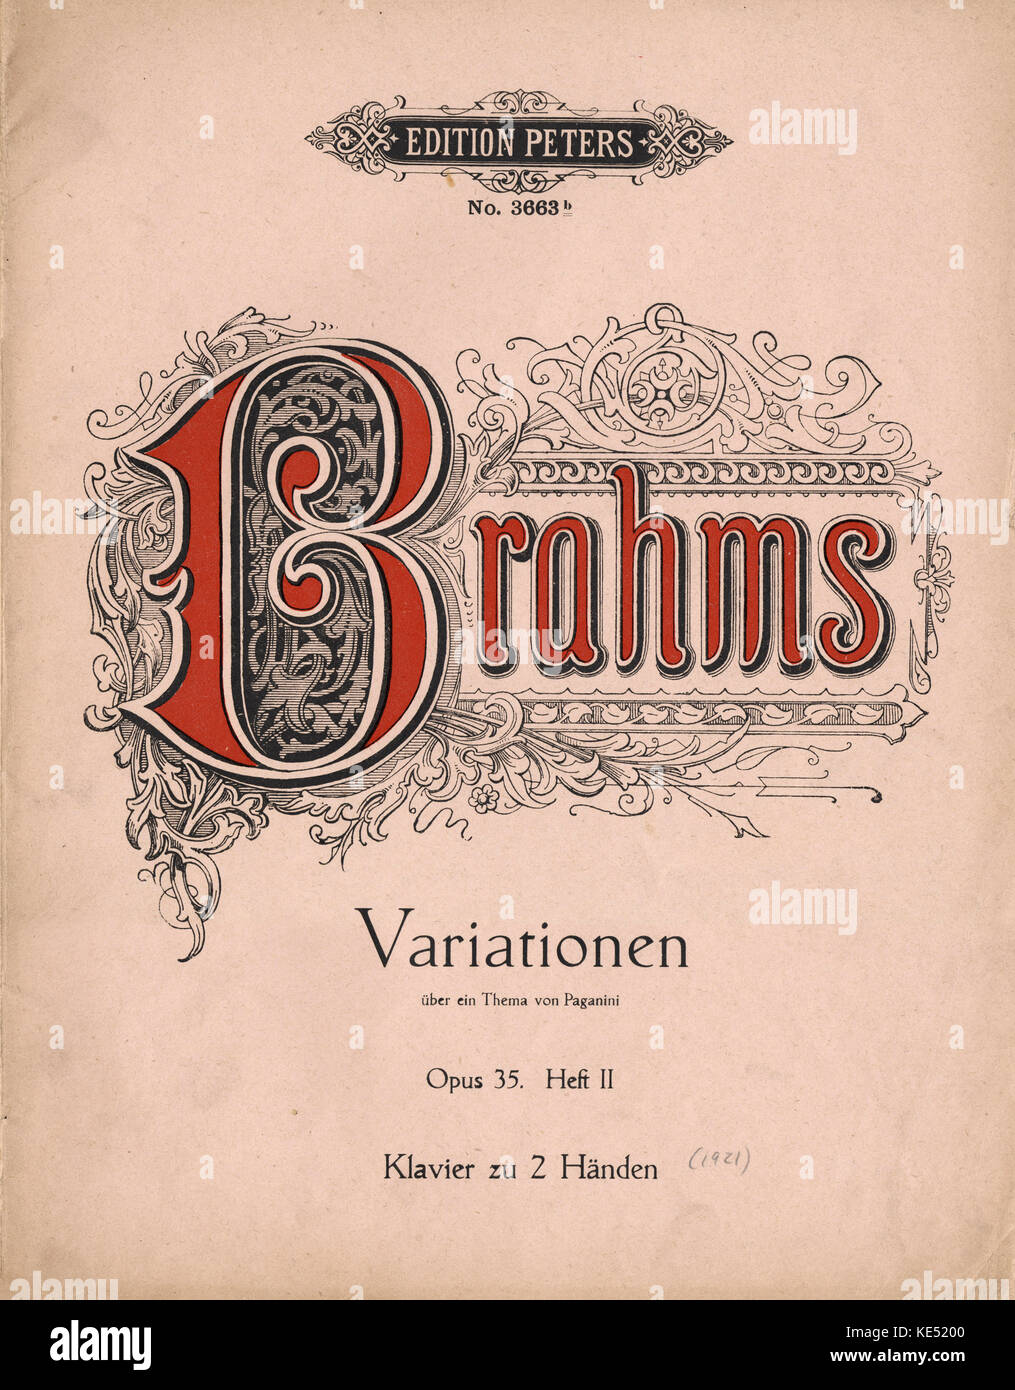 Johannes Brahms 's Variation on a theme by Paganini for for piano with 2 hands. Opus 35, part II.  Score cover.  German composer, 7 May 1833 - 3 April 1897.  Published by CF Peters, Leipzig. Stock Photo